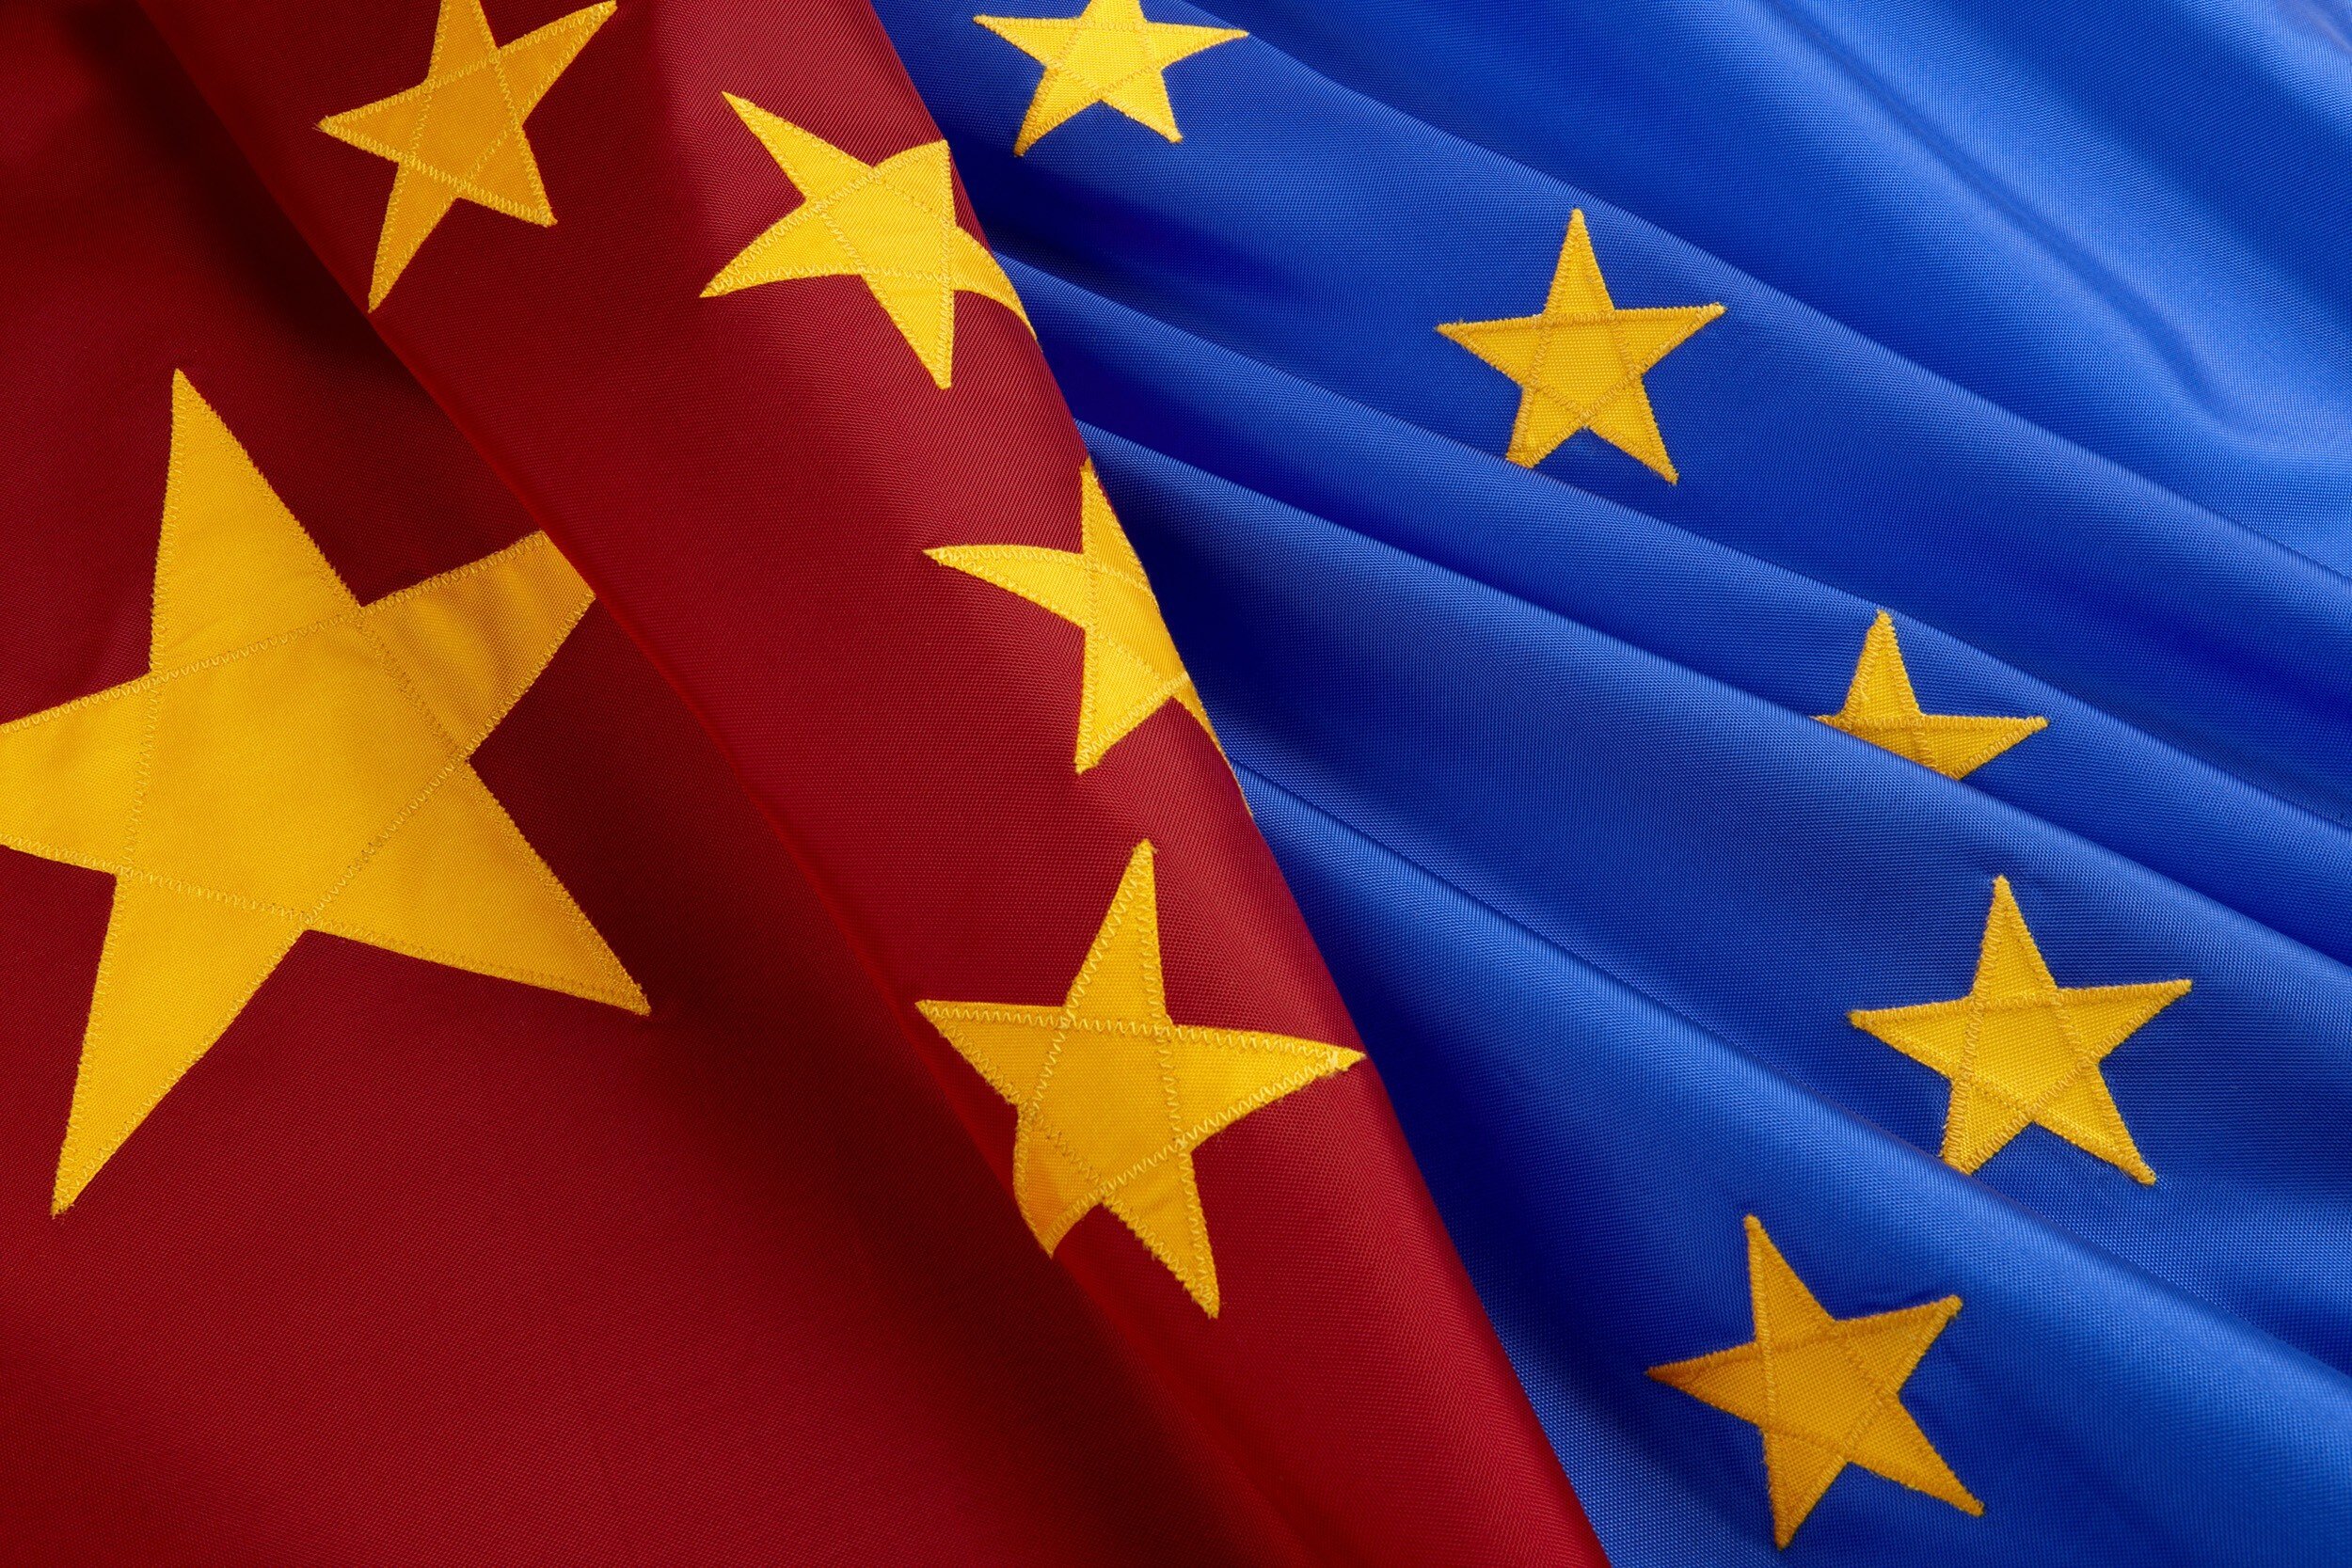 The European Commission has called for sceptics to support its “good and solid” investment deal likely to be reached this week. Photo: Shutterstock